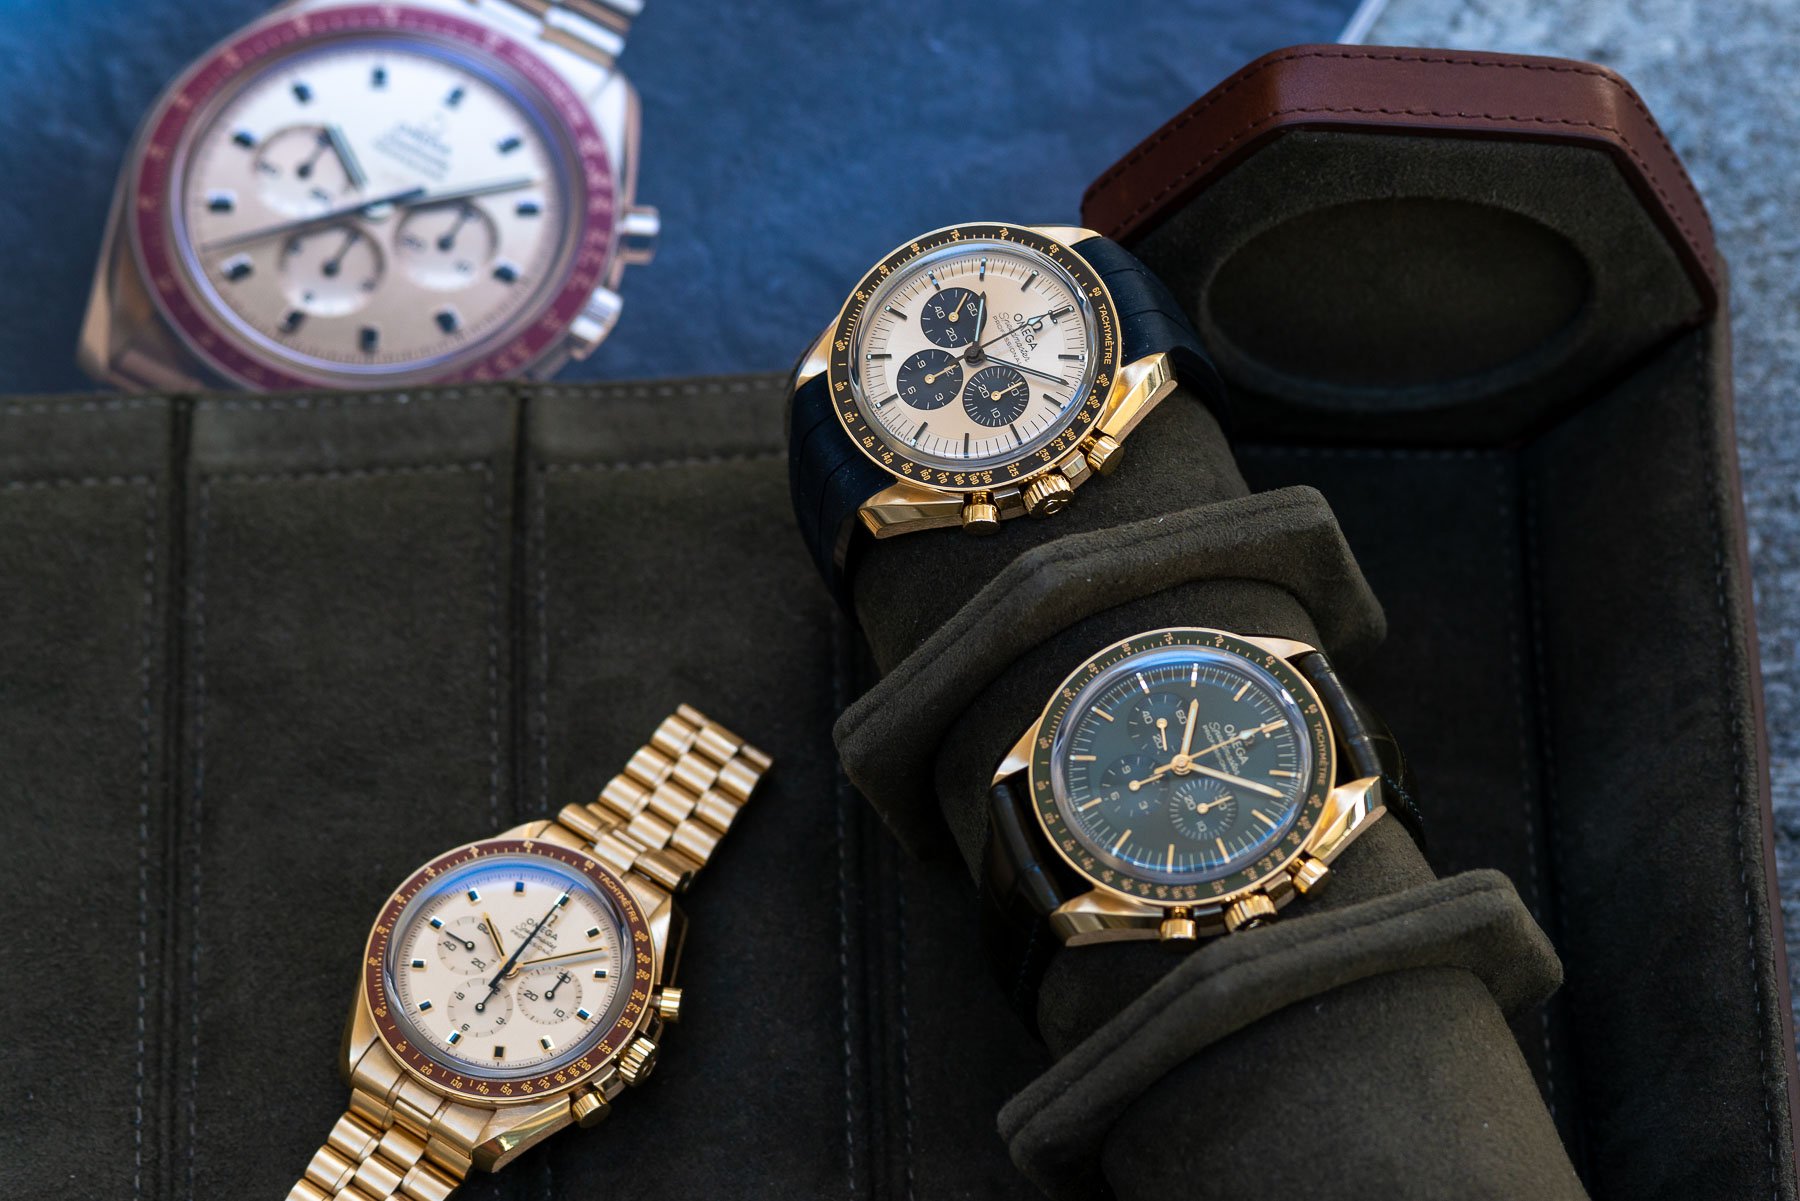 Family of Purist, Professional, Gold vintage history